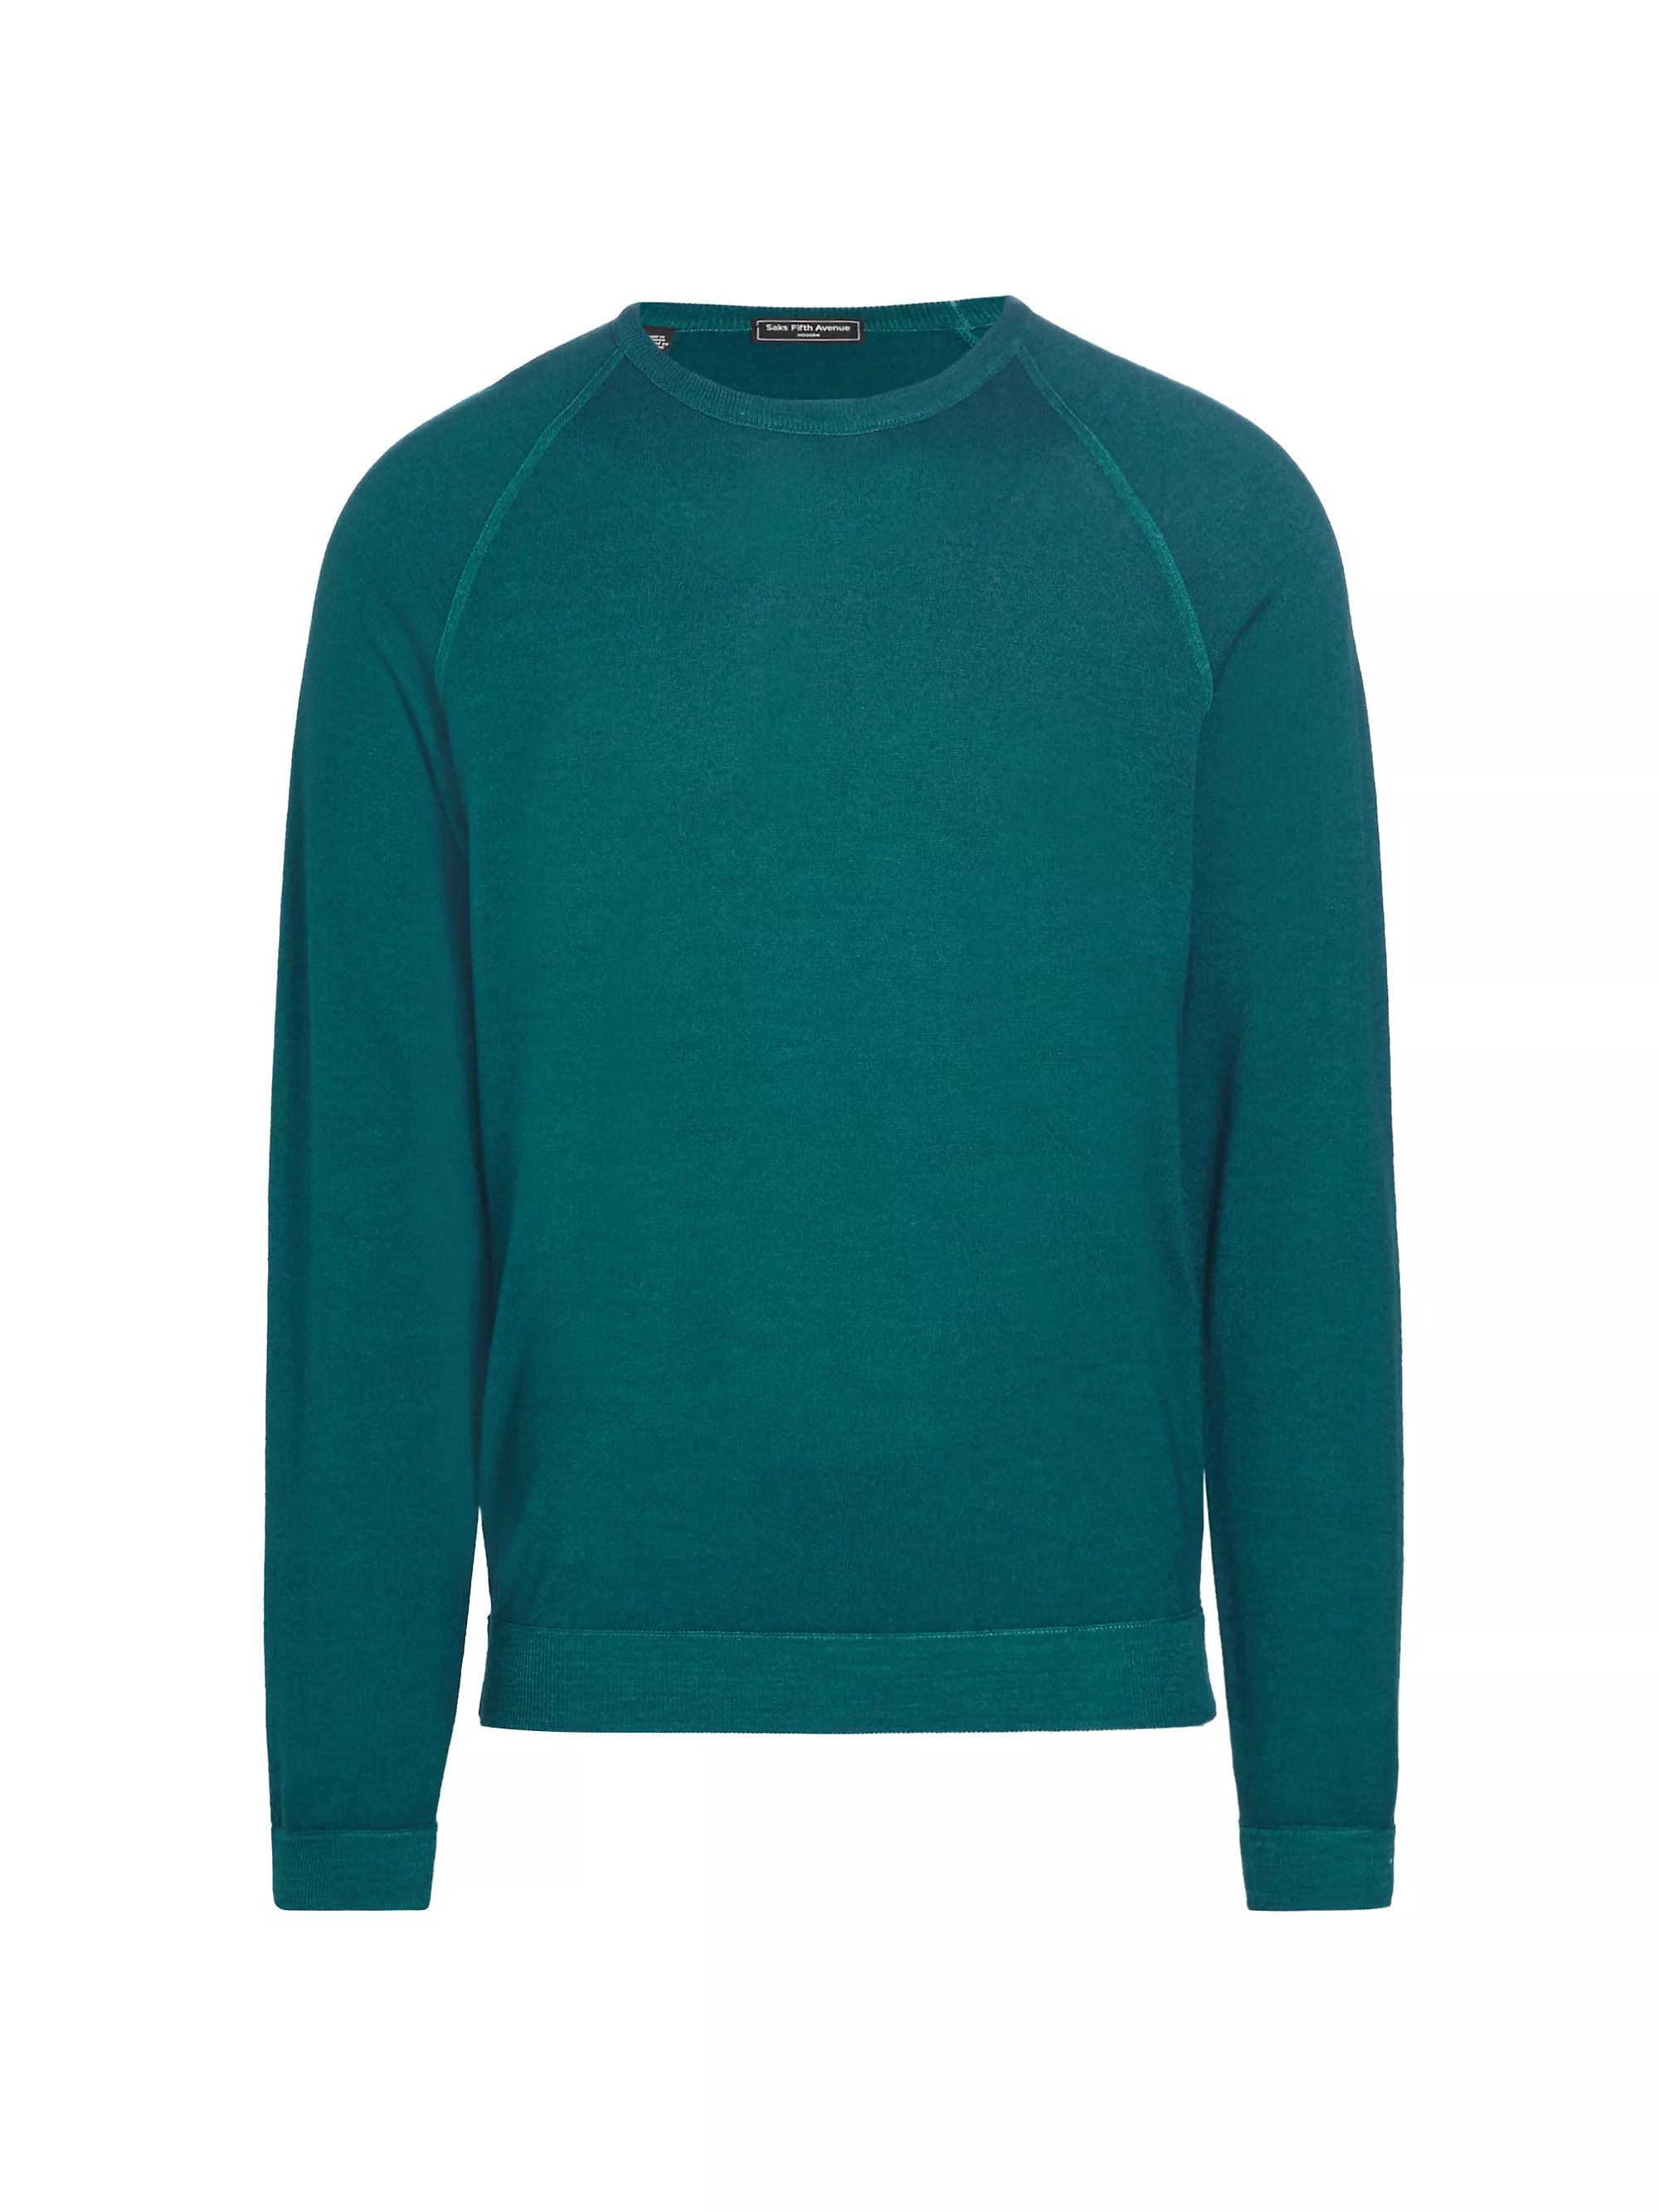 Shop Saks Fifth Avenue COLLECTION Wool Crewneck Slim-Fit Sweater | Saks Fifth Avenue | Saks Fifth Avenue